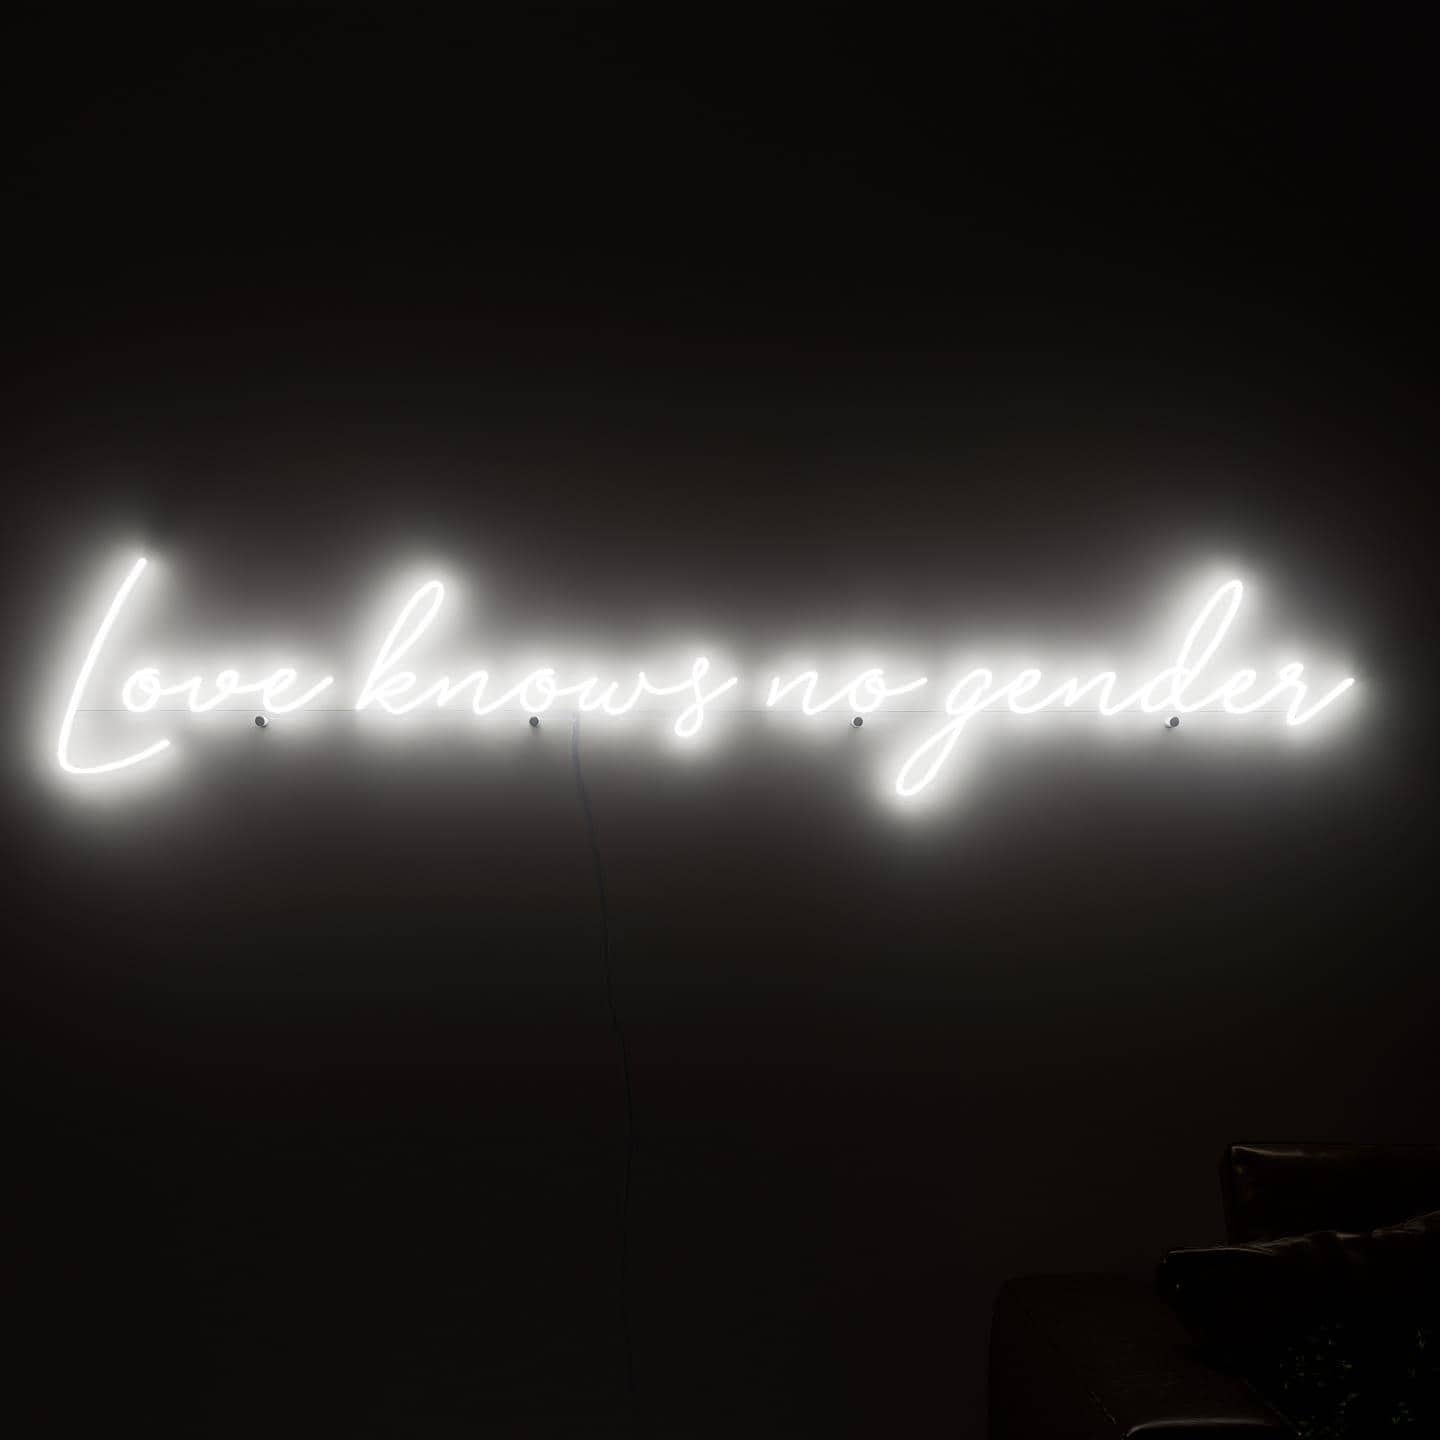 dark-night-shot-with-lit-white-neon-lights-hanging-on-the-wall-for-display-love-knows-no-gender